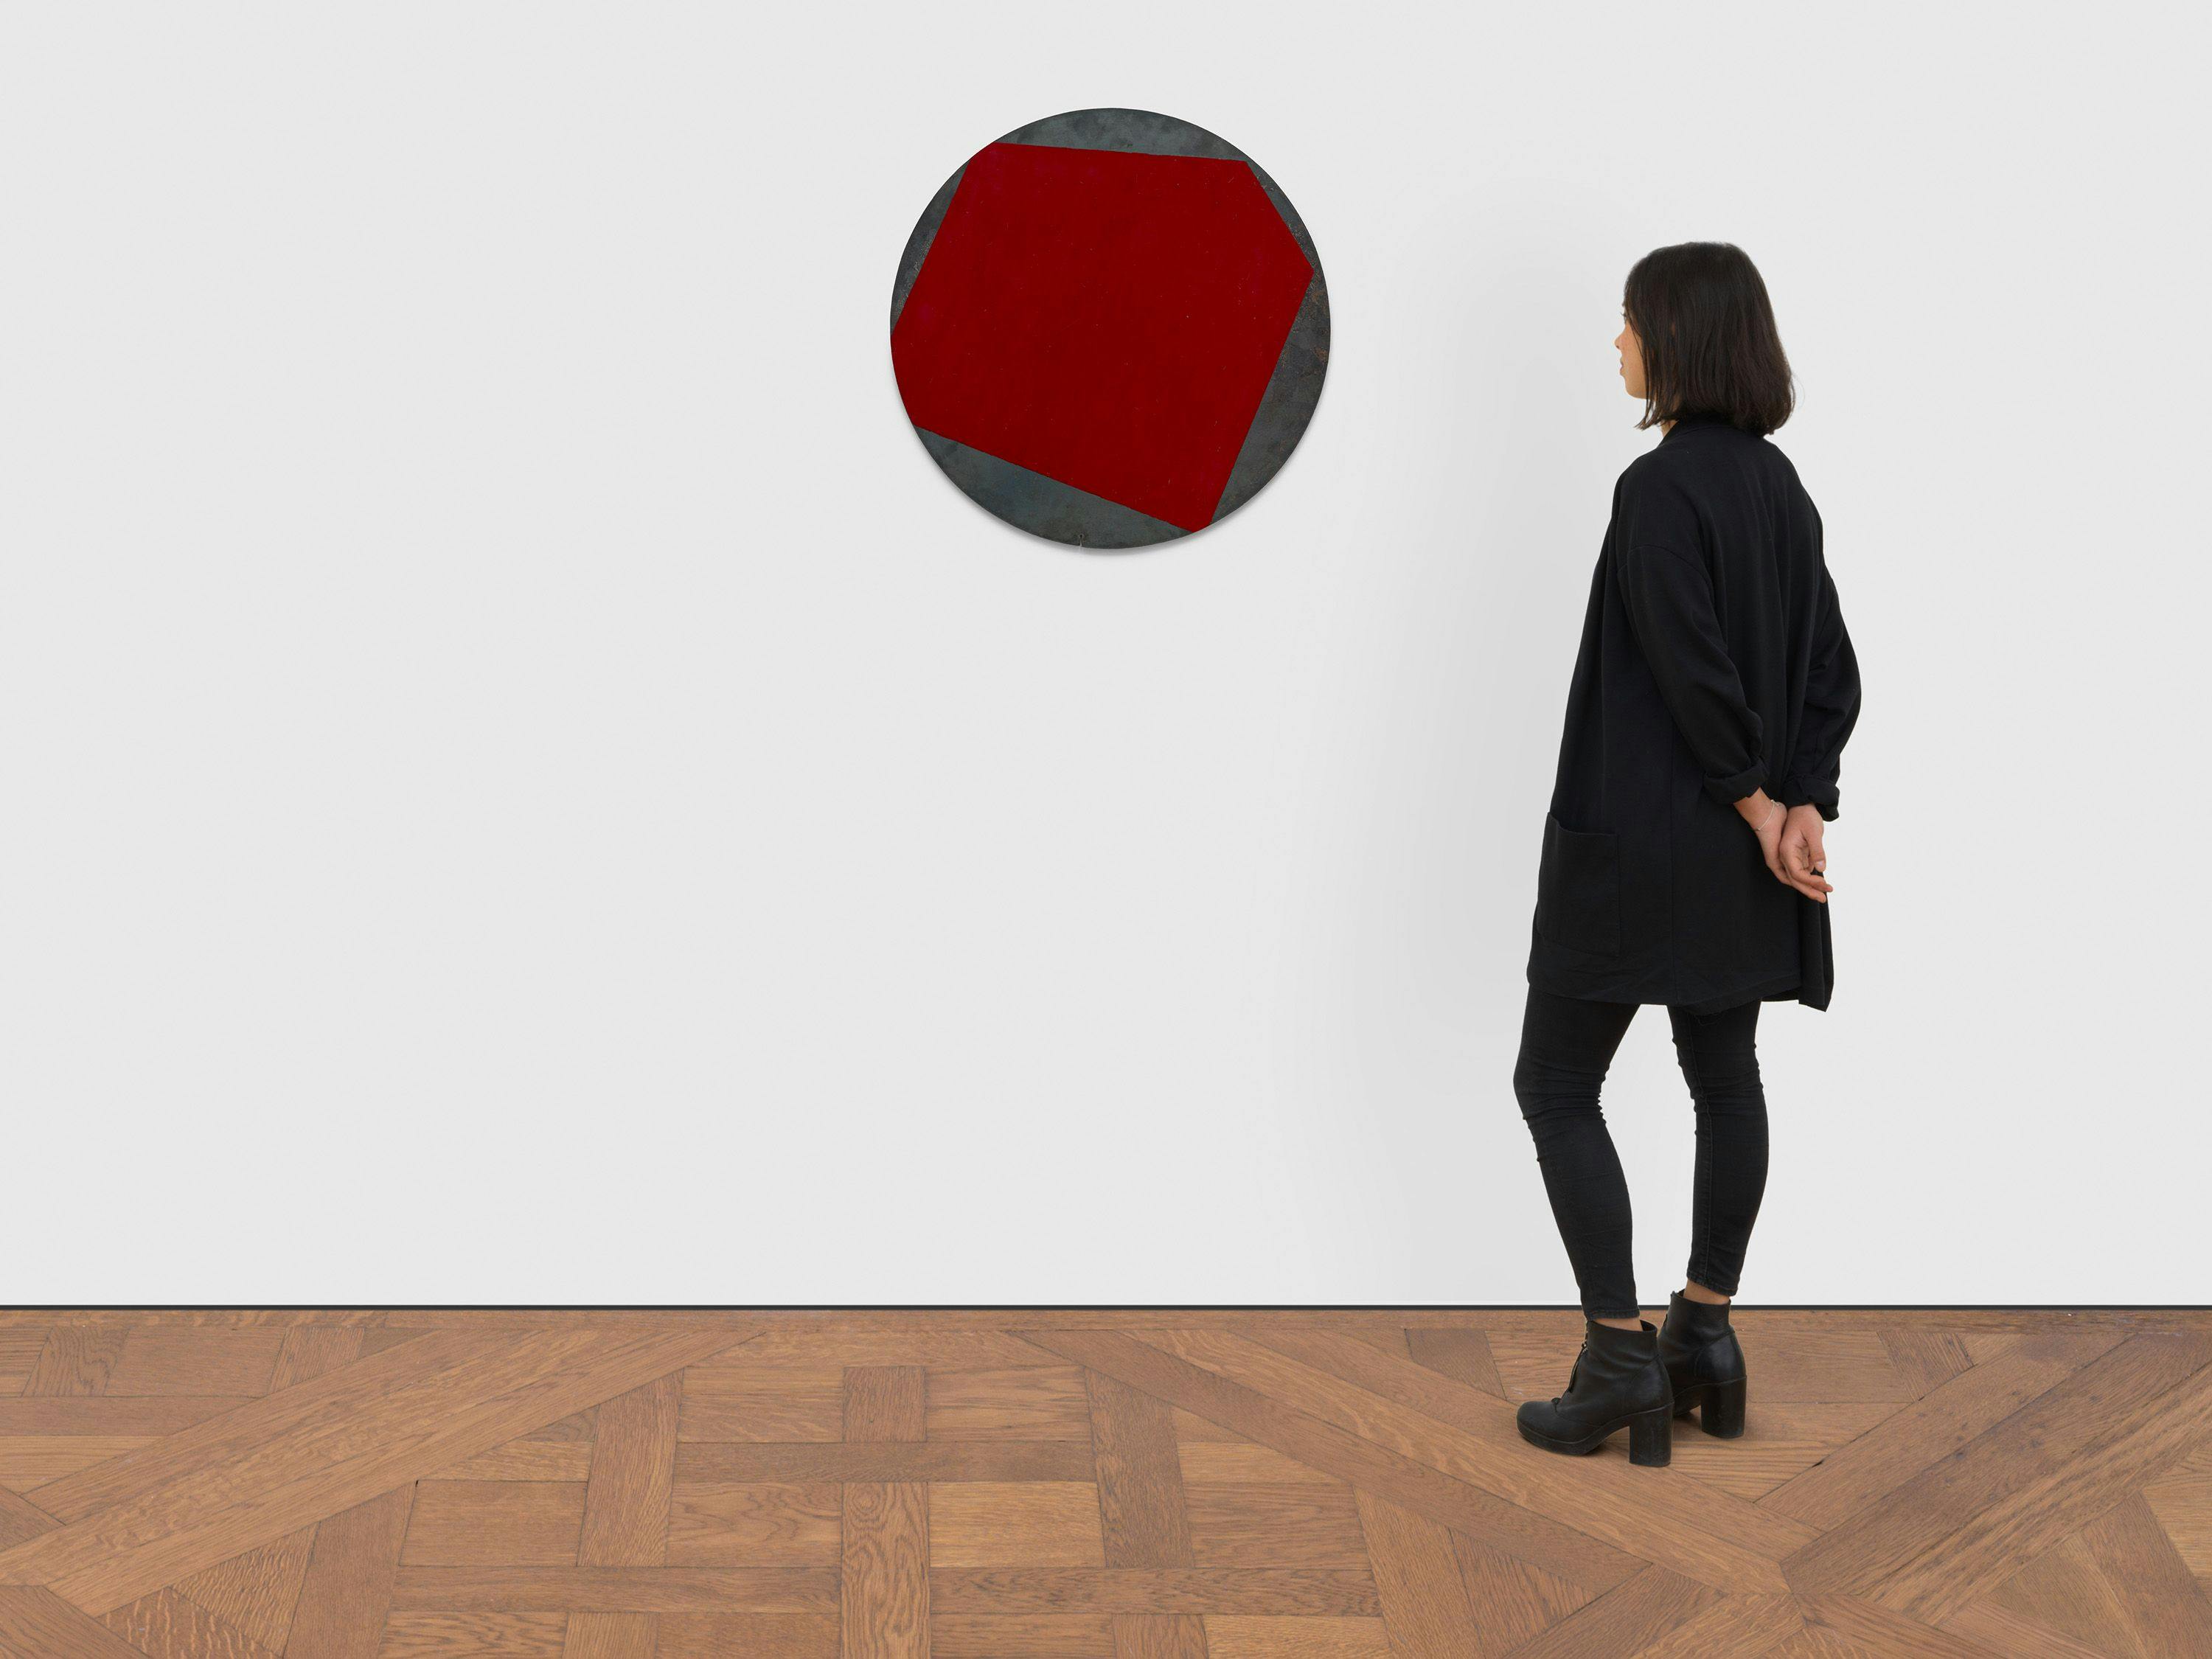 A painting on steel by Merrill Wagner, titled Red Circle, dated 1990.